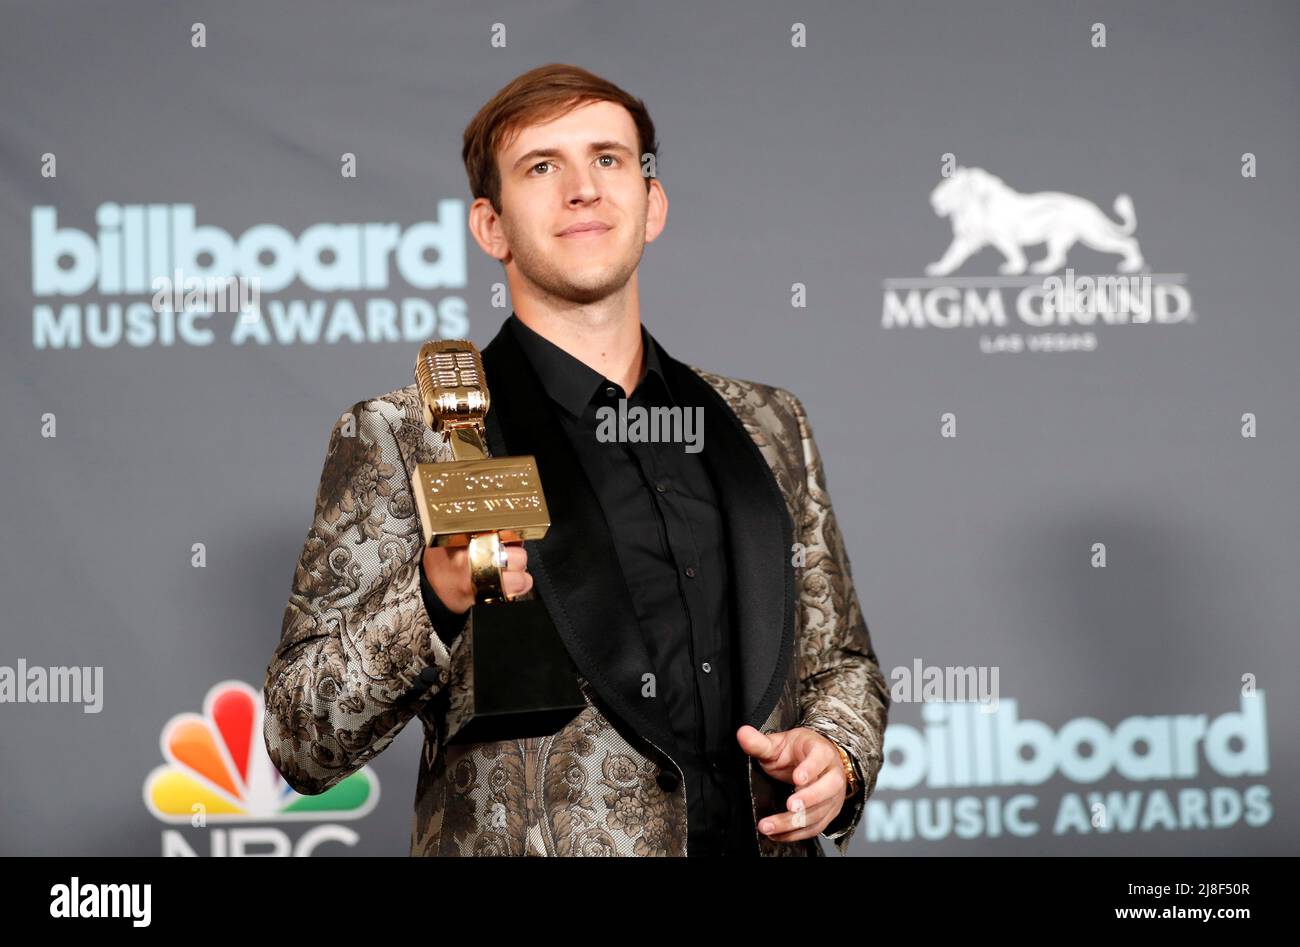 Illenium poses with award for Top Dance/Electric Album in the photo room during the Billboard Music Awards in Las Vegas, Nevada U.S. May 15, 2022. REUTERS/Steve Marcus Stock Photo